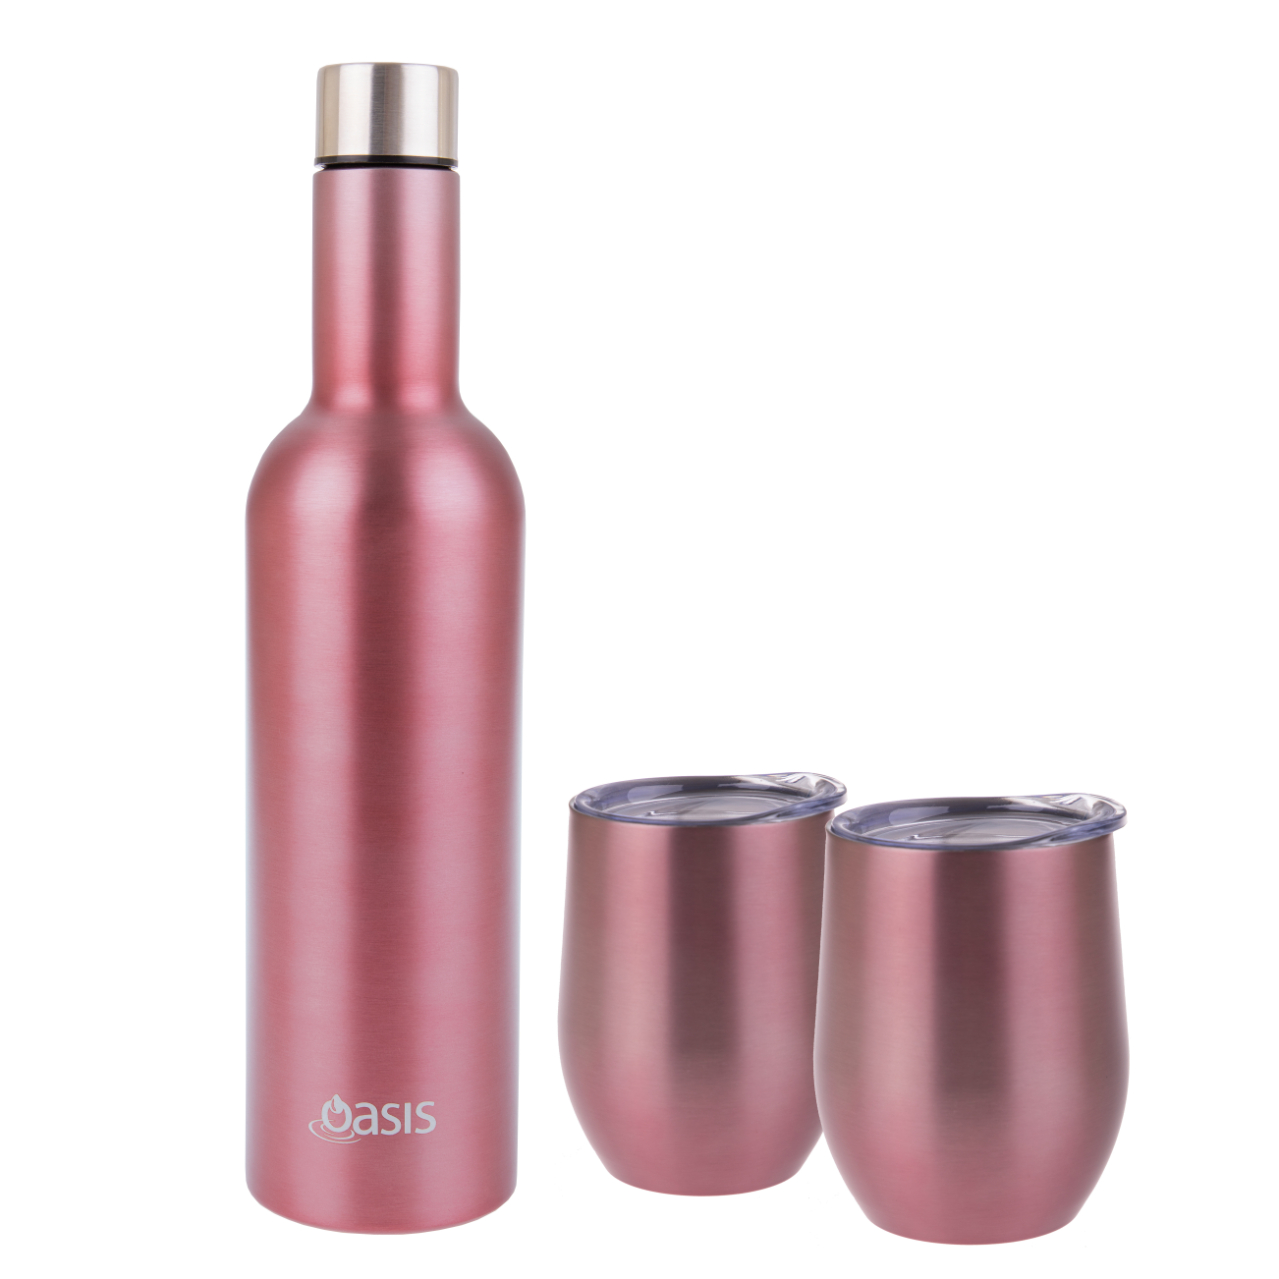 Oasis 3 Pce Stainless Steel Double Wall Insulated Wine Gift Set Rose